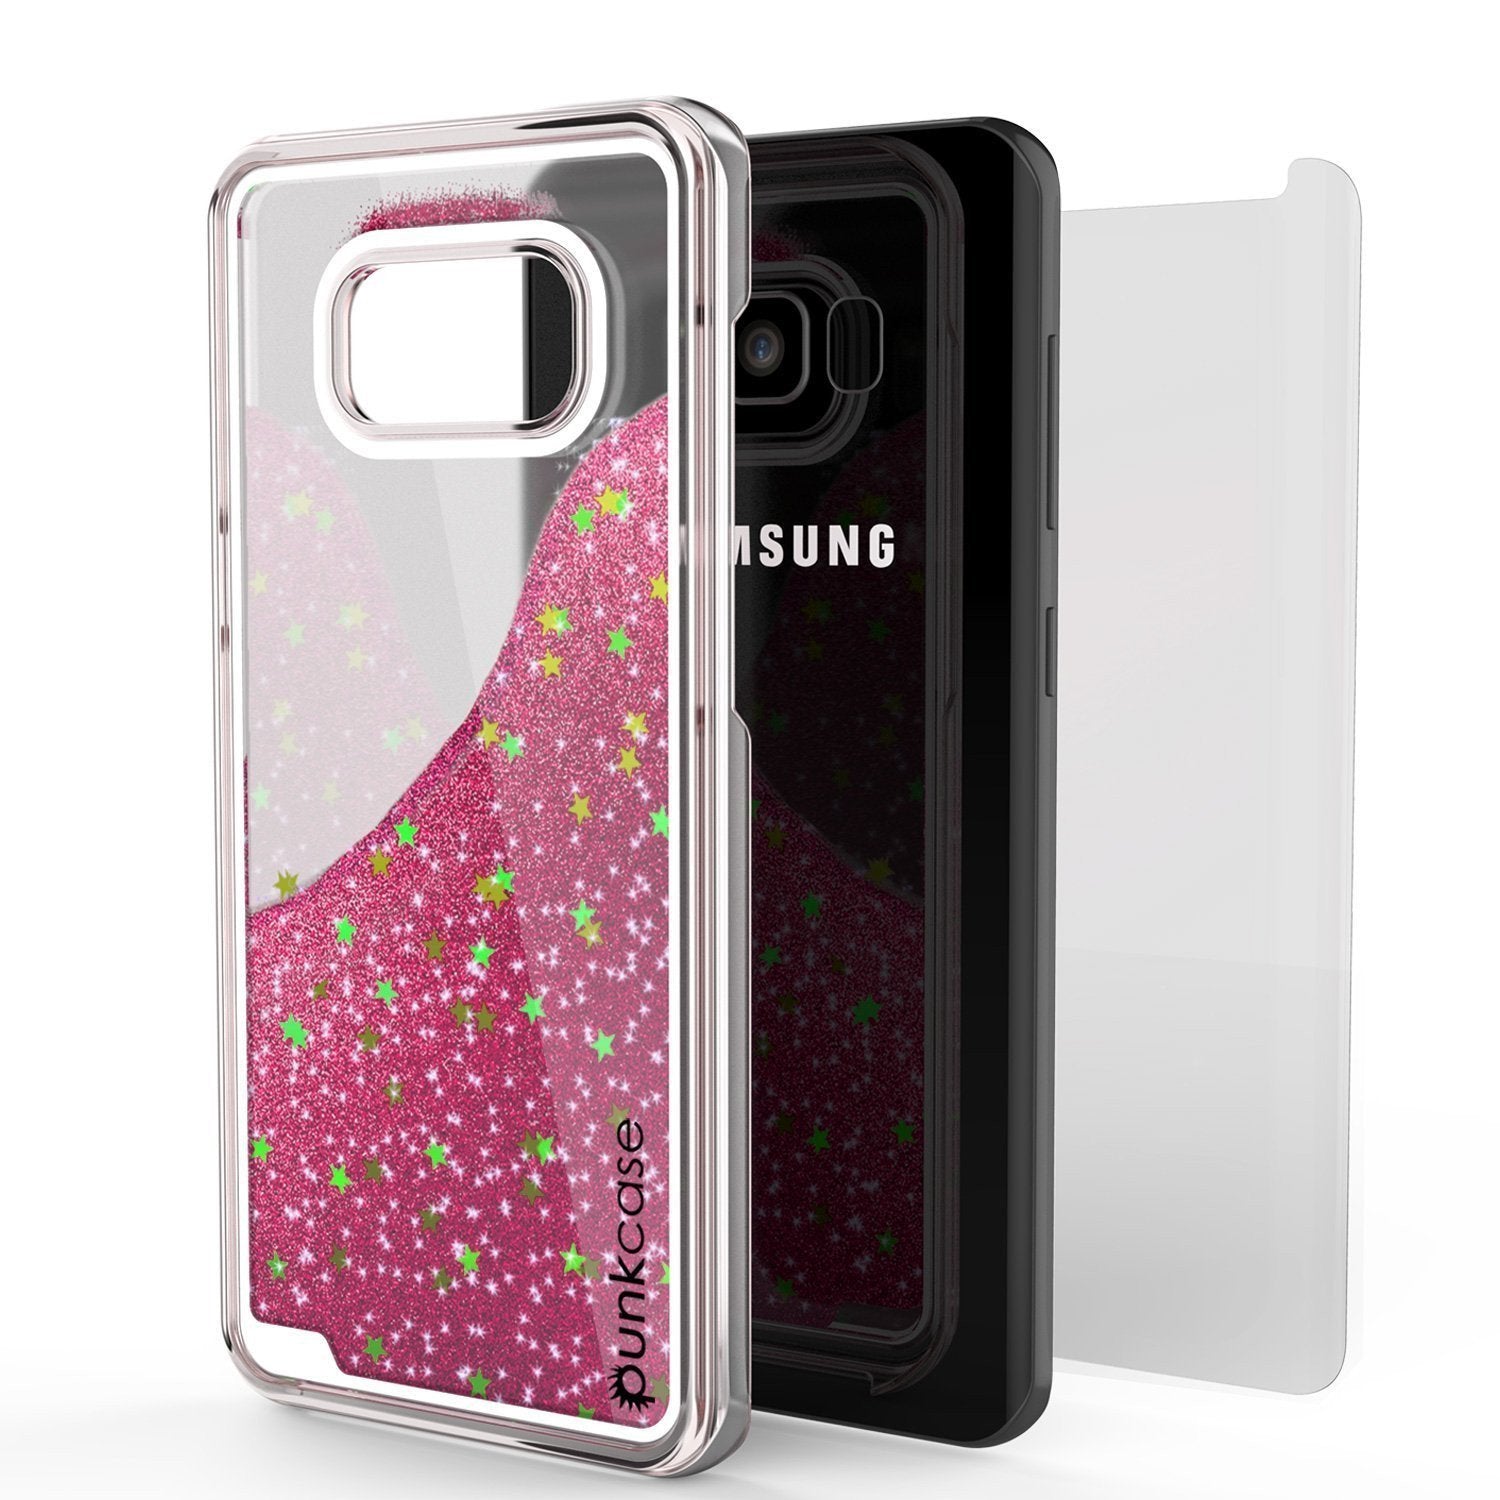 S8 Plus Case, Punkcase Liquid Pink Series Protective Dual Layer Cover